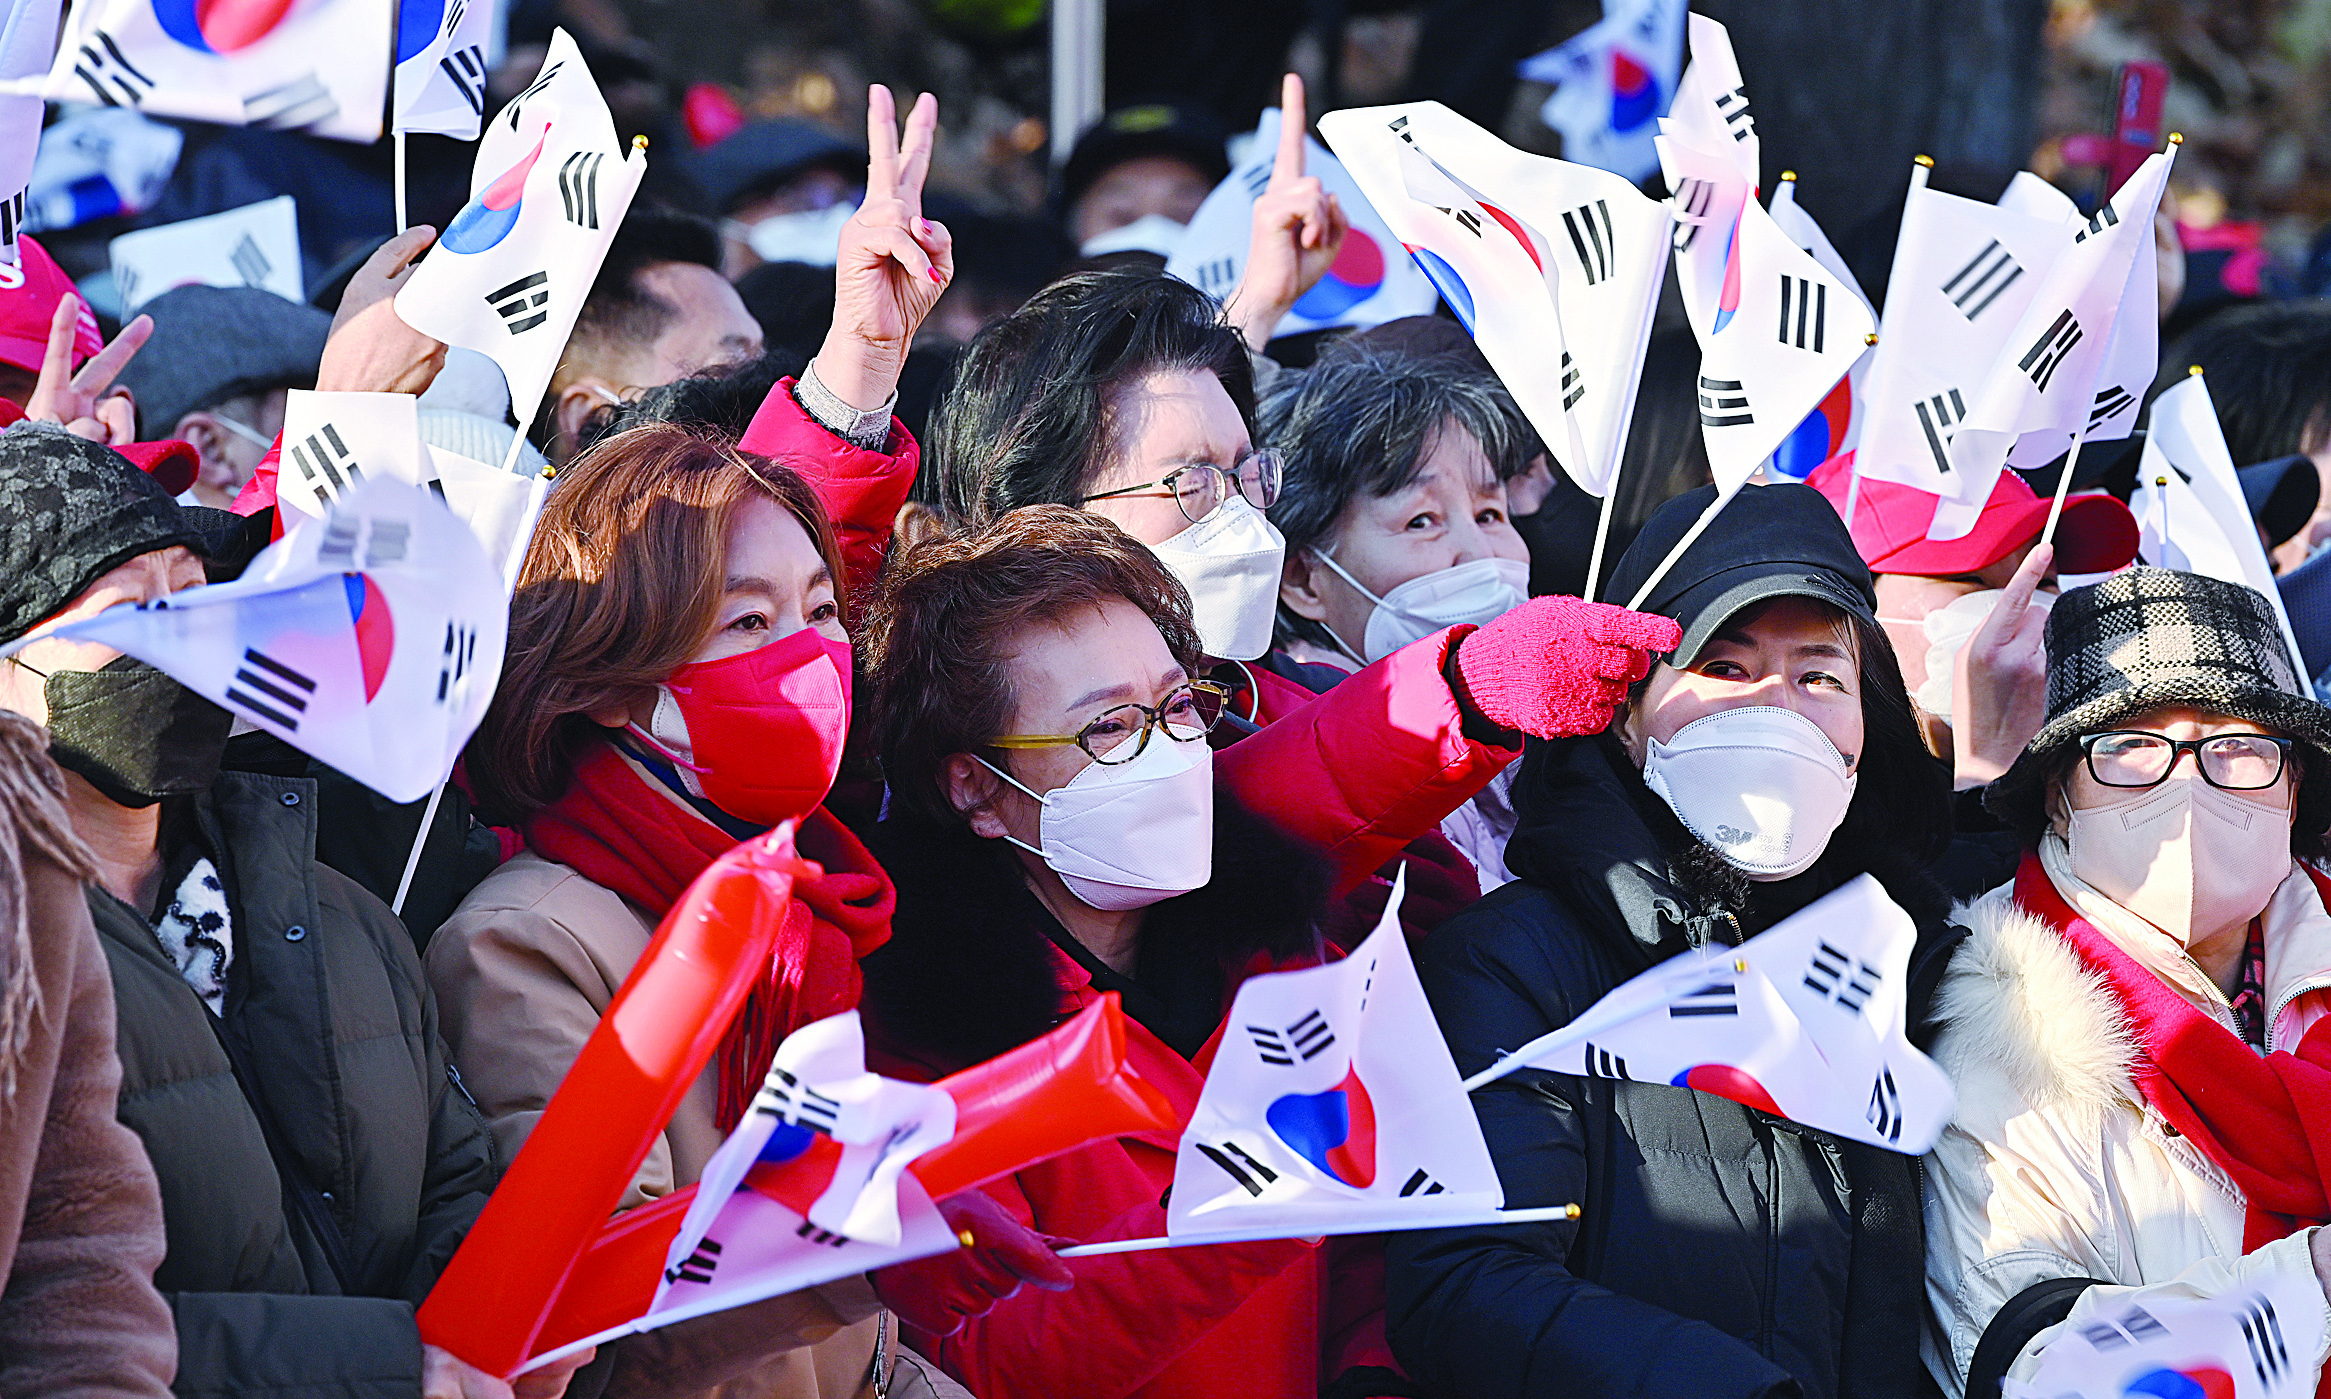 SEOUL: Supporters of South Korea's presidential candidate Yoon Suk-yeol of the main opposition People Power Party cheer during an election campaign in Seoul, ahead of the March 9 presidential election. - AFPn